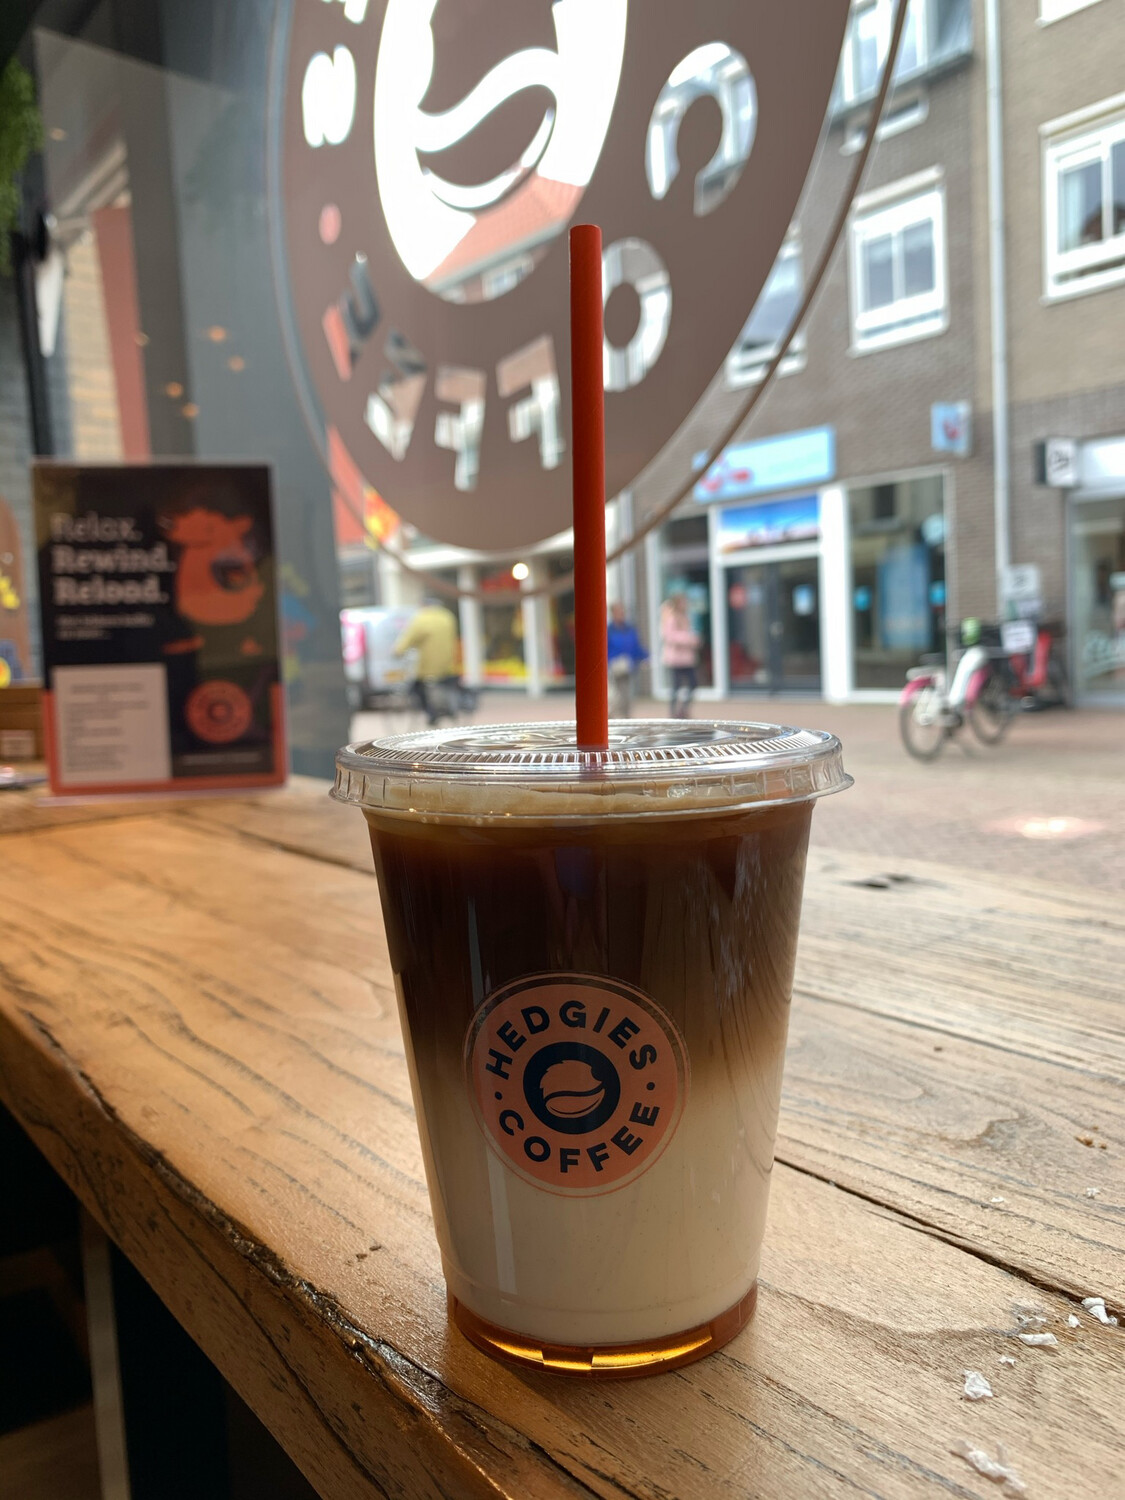 ICED koffie